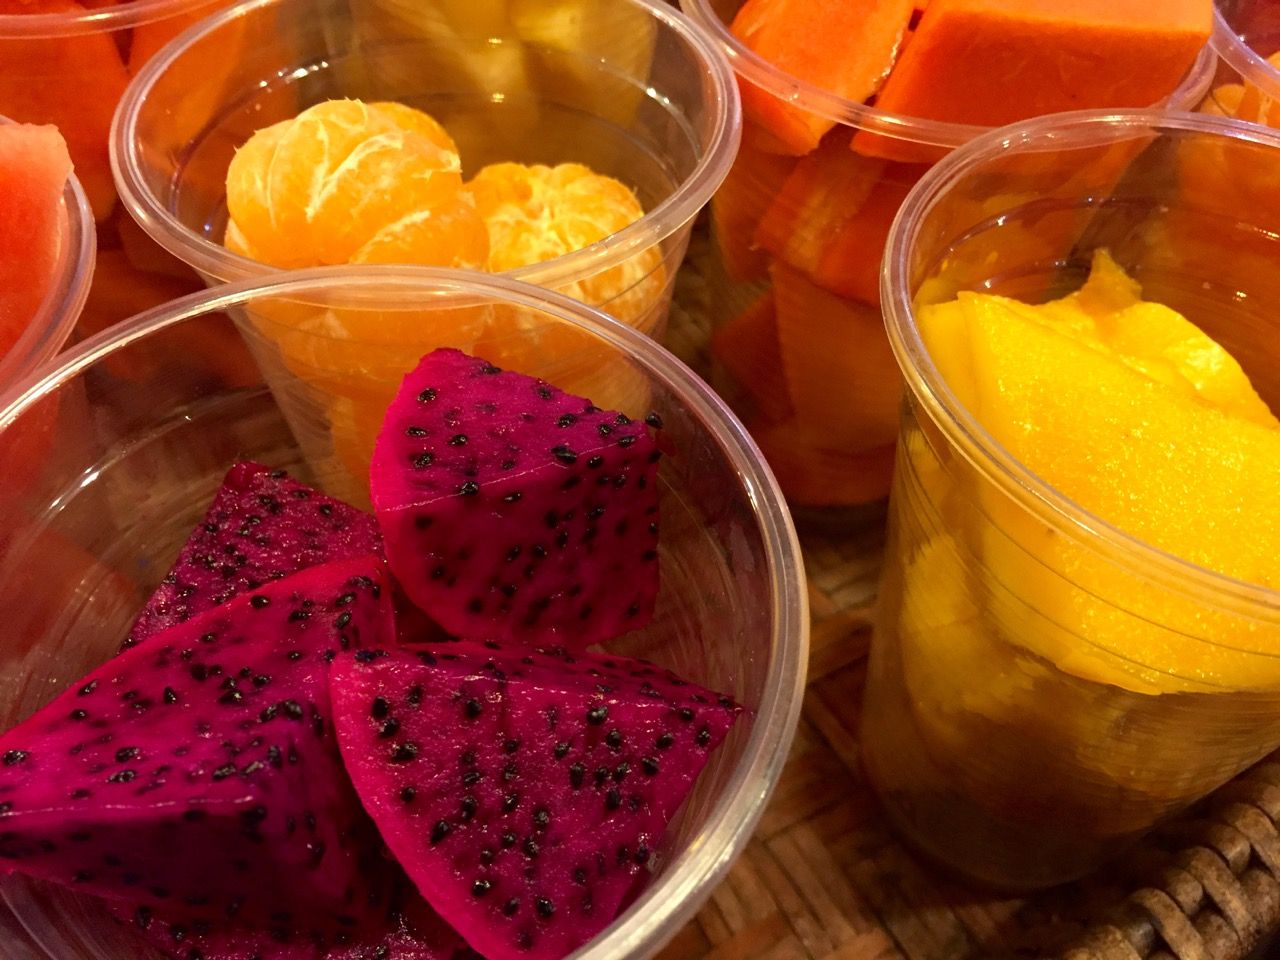 Various fruits, in particular red dragon fruit.